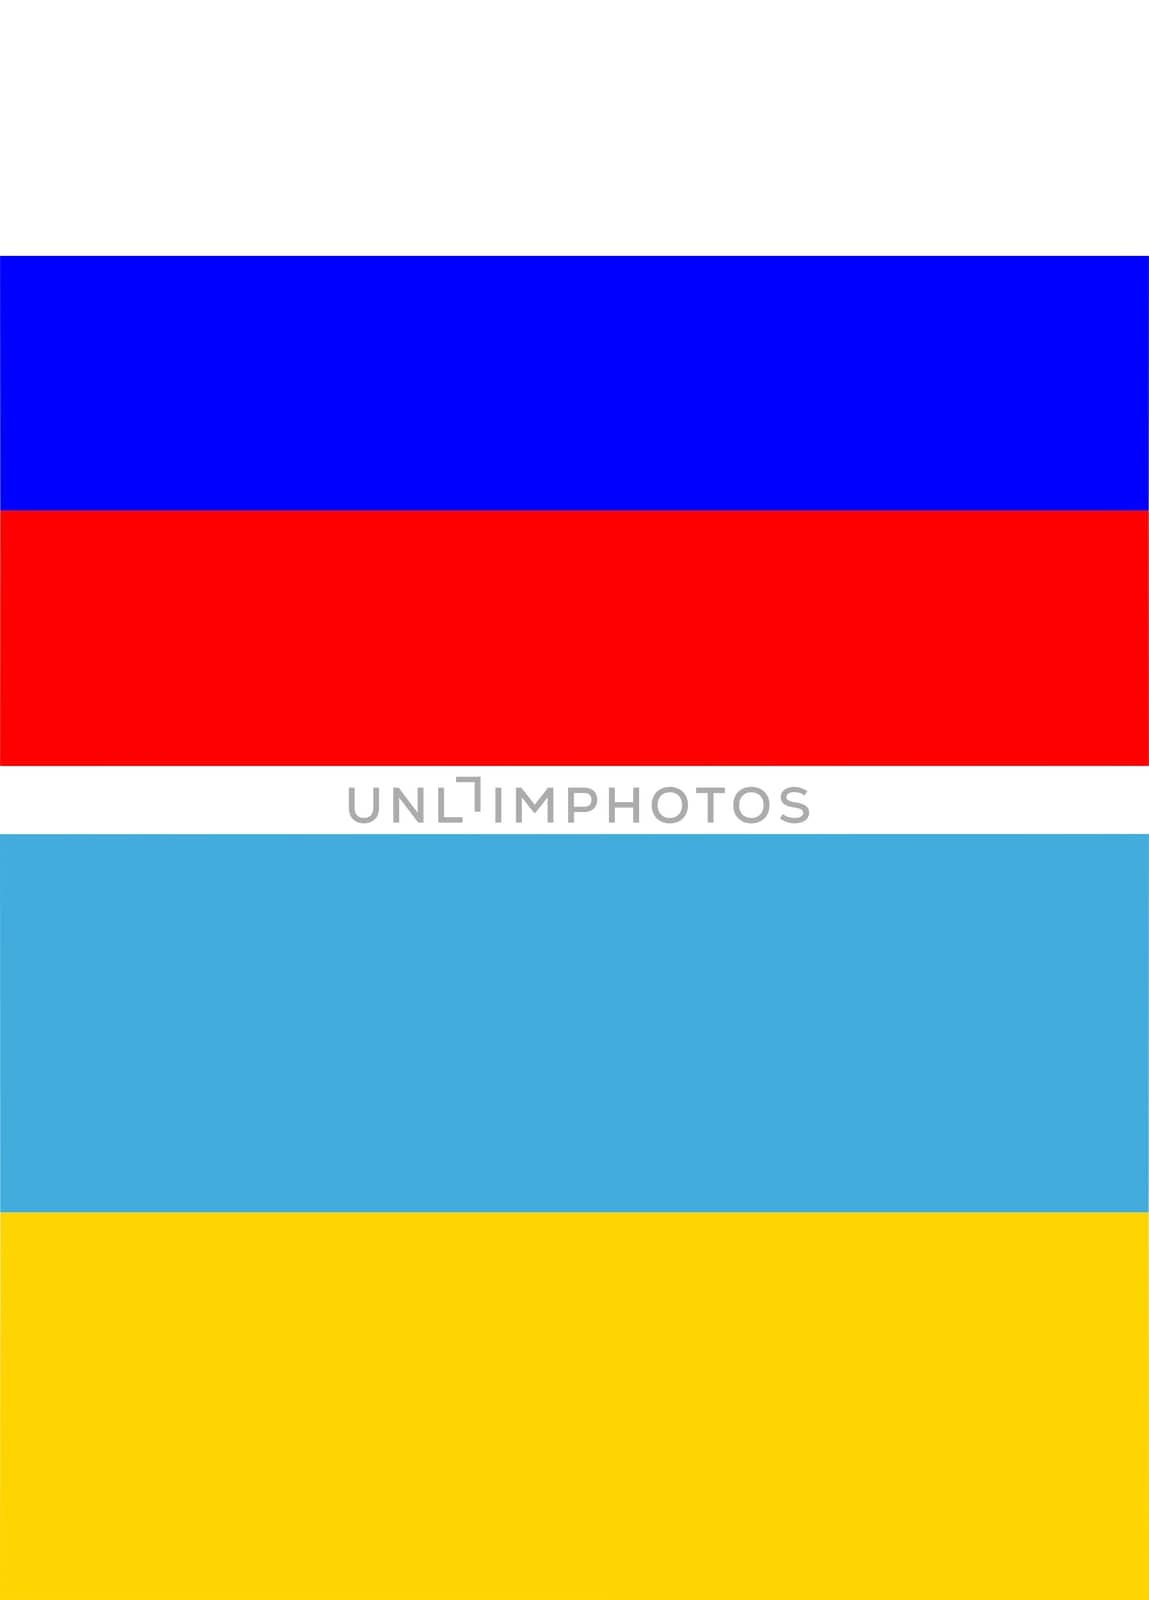 Russia and Ukraine flags - isolated vector illustration